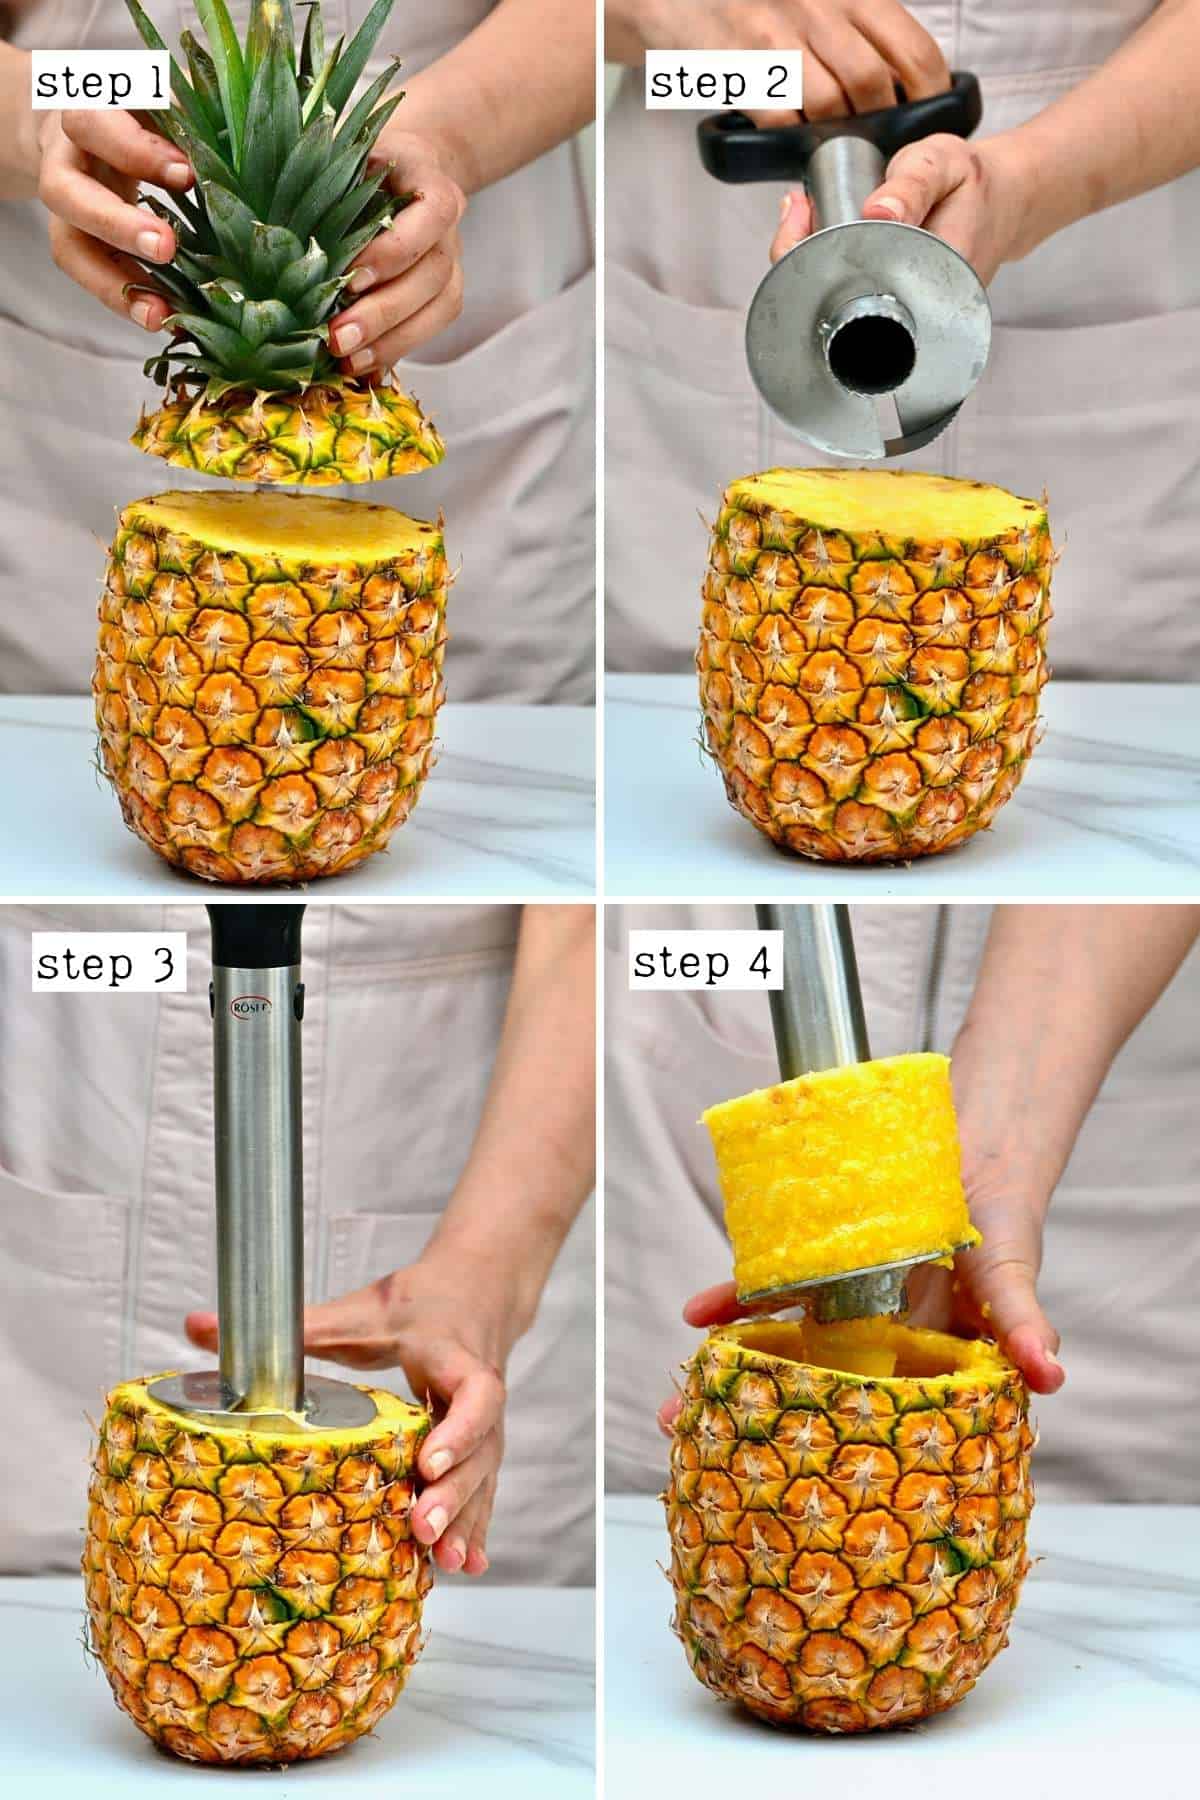 How to Pick a Pineapple: 5 Simple Tips